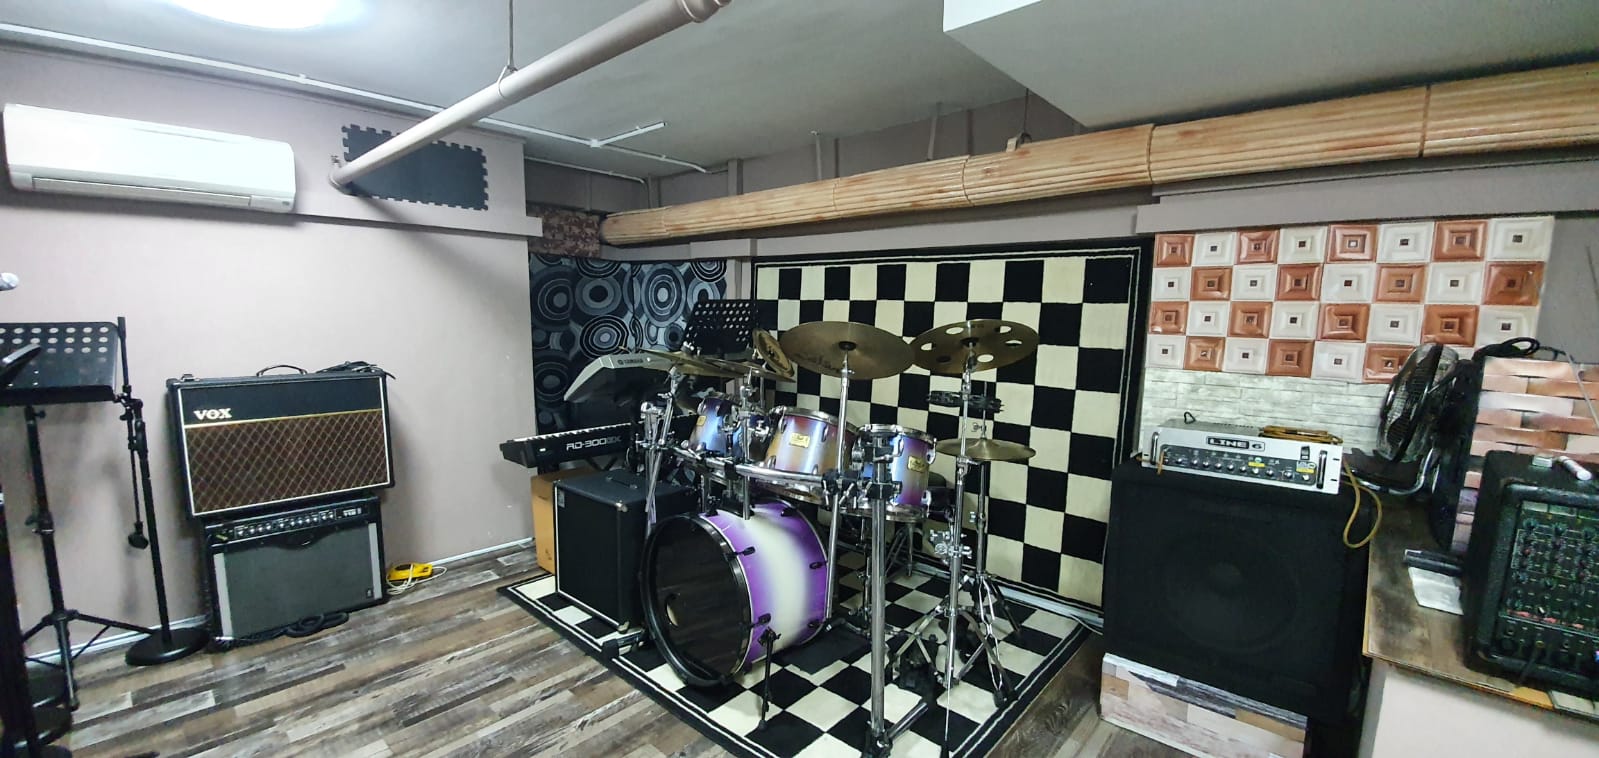 bmic promotion cheapest most affordable studio 7 days a week in singapore. Comes with Drum sets guitars, amplifiers, microphones and an amazing sound system 